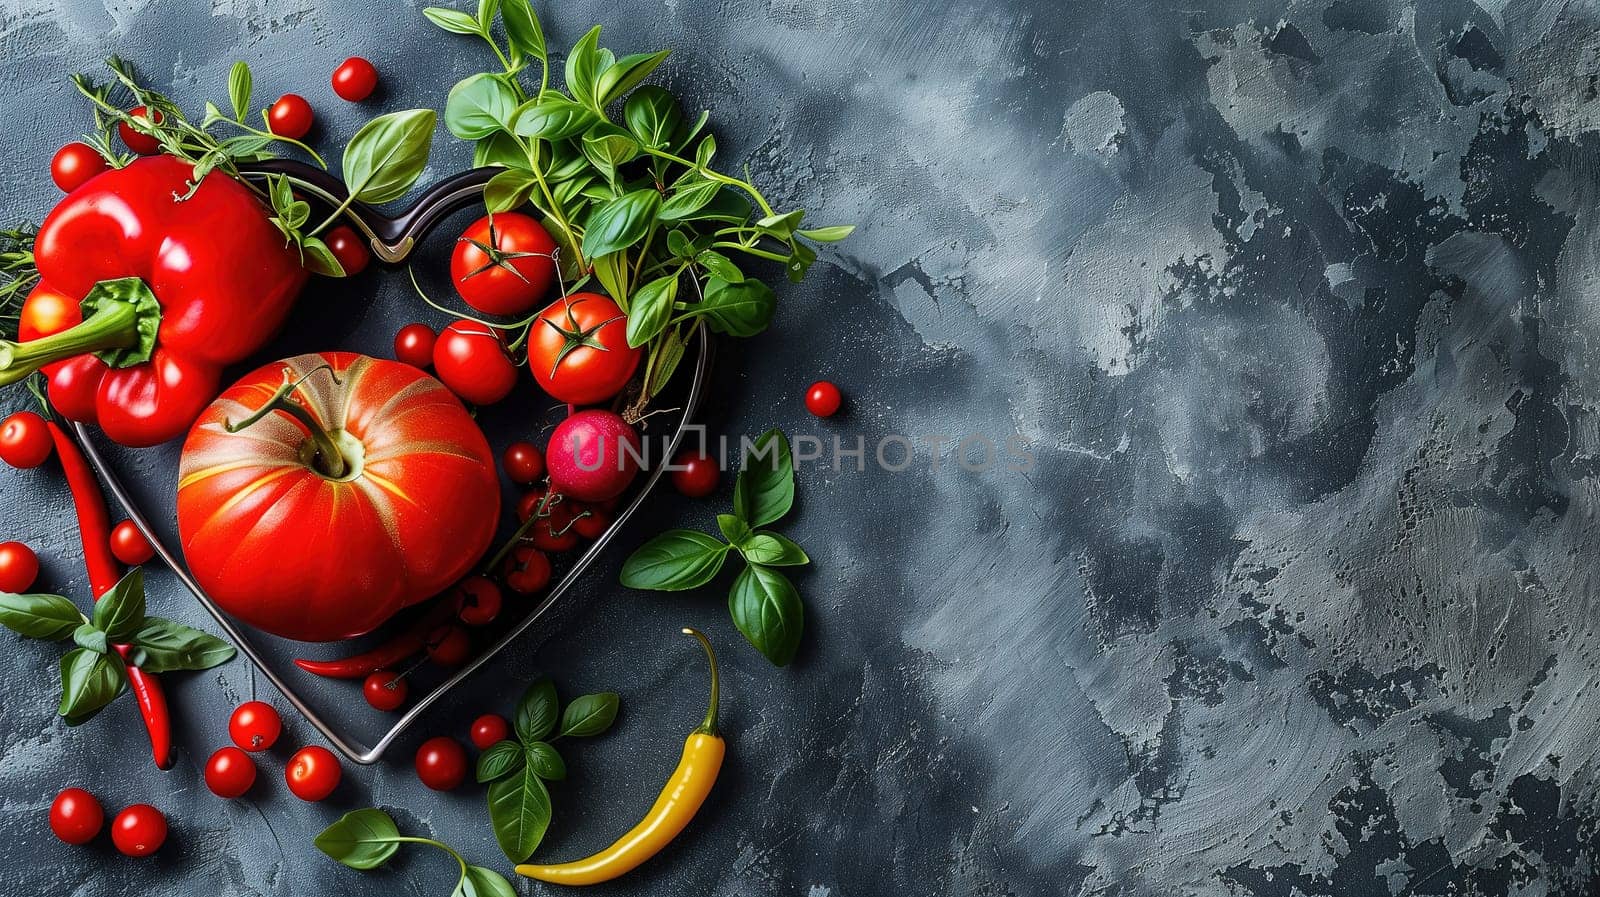 Heart Shaped Basket Filled With Tomatoes and Vegetables by TRMK